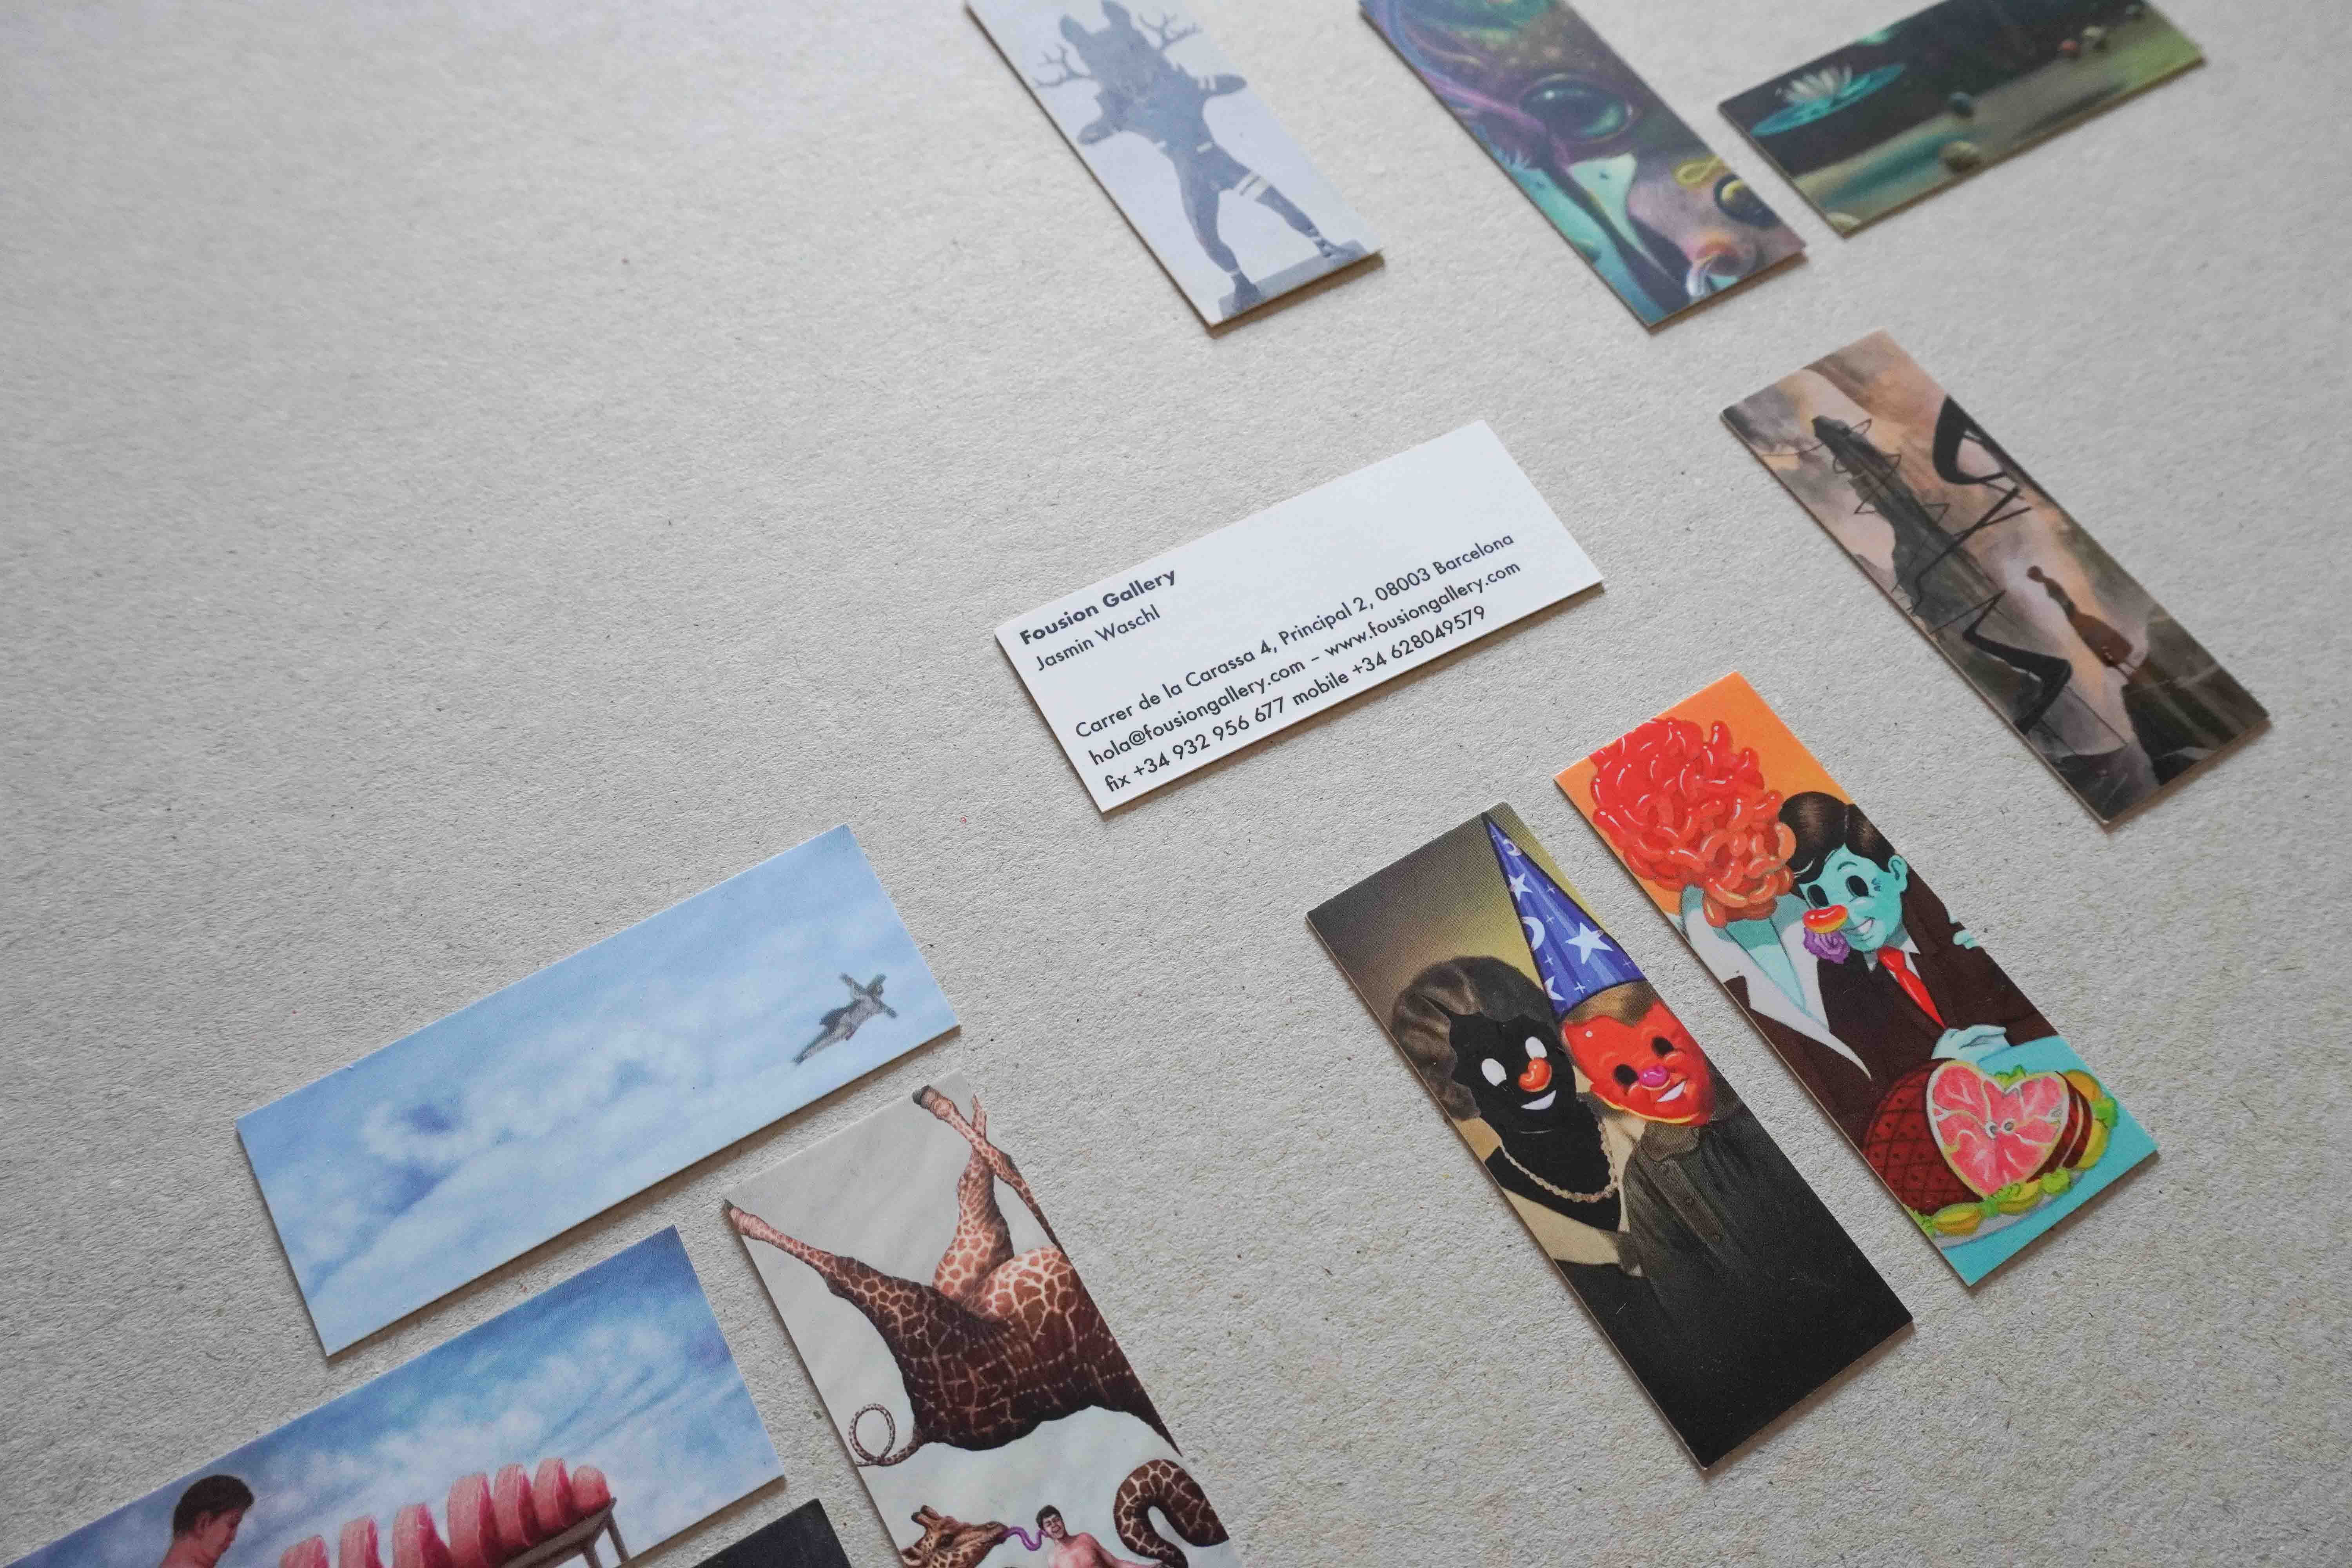 Fousion Gallery – Business Cards